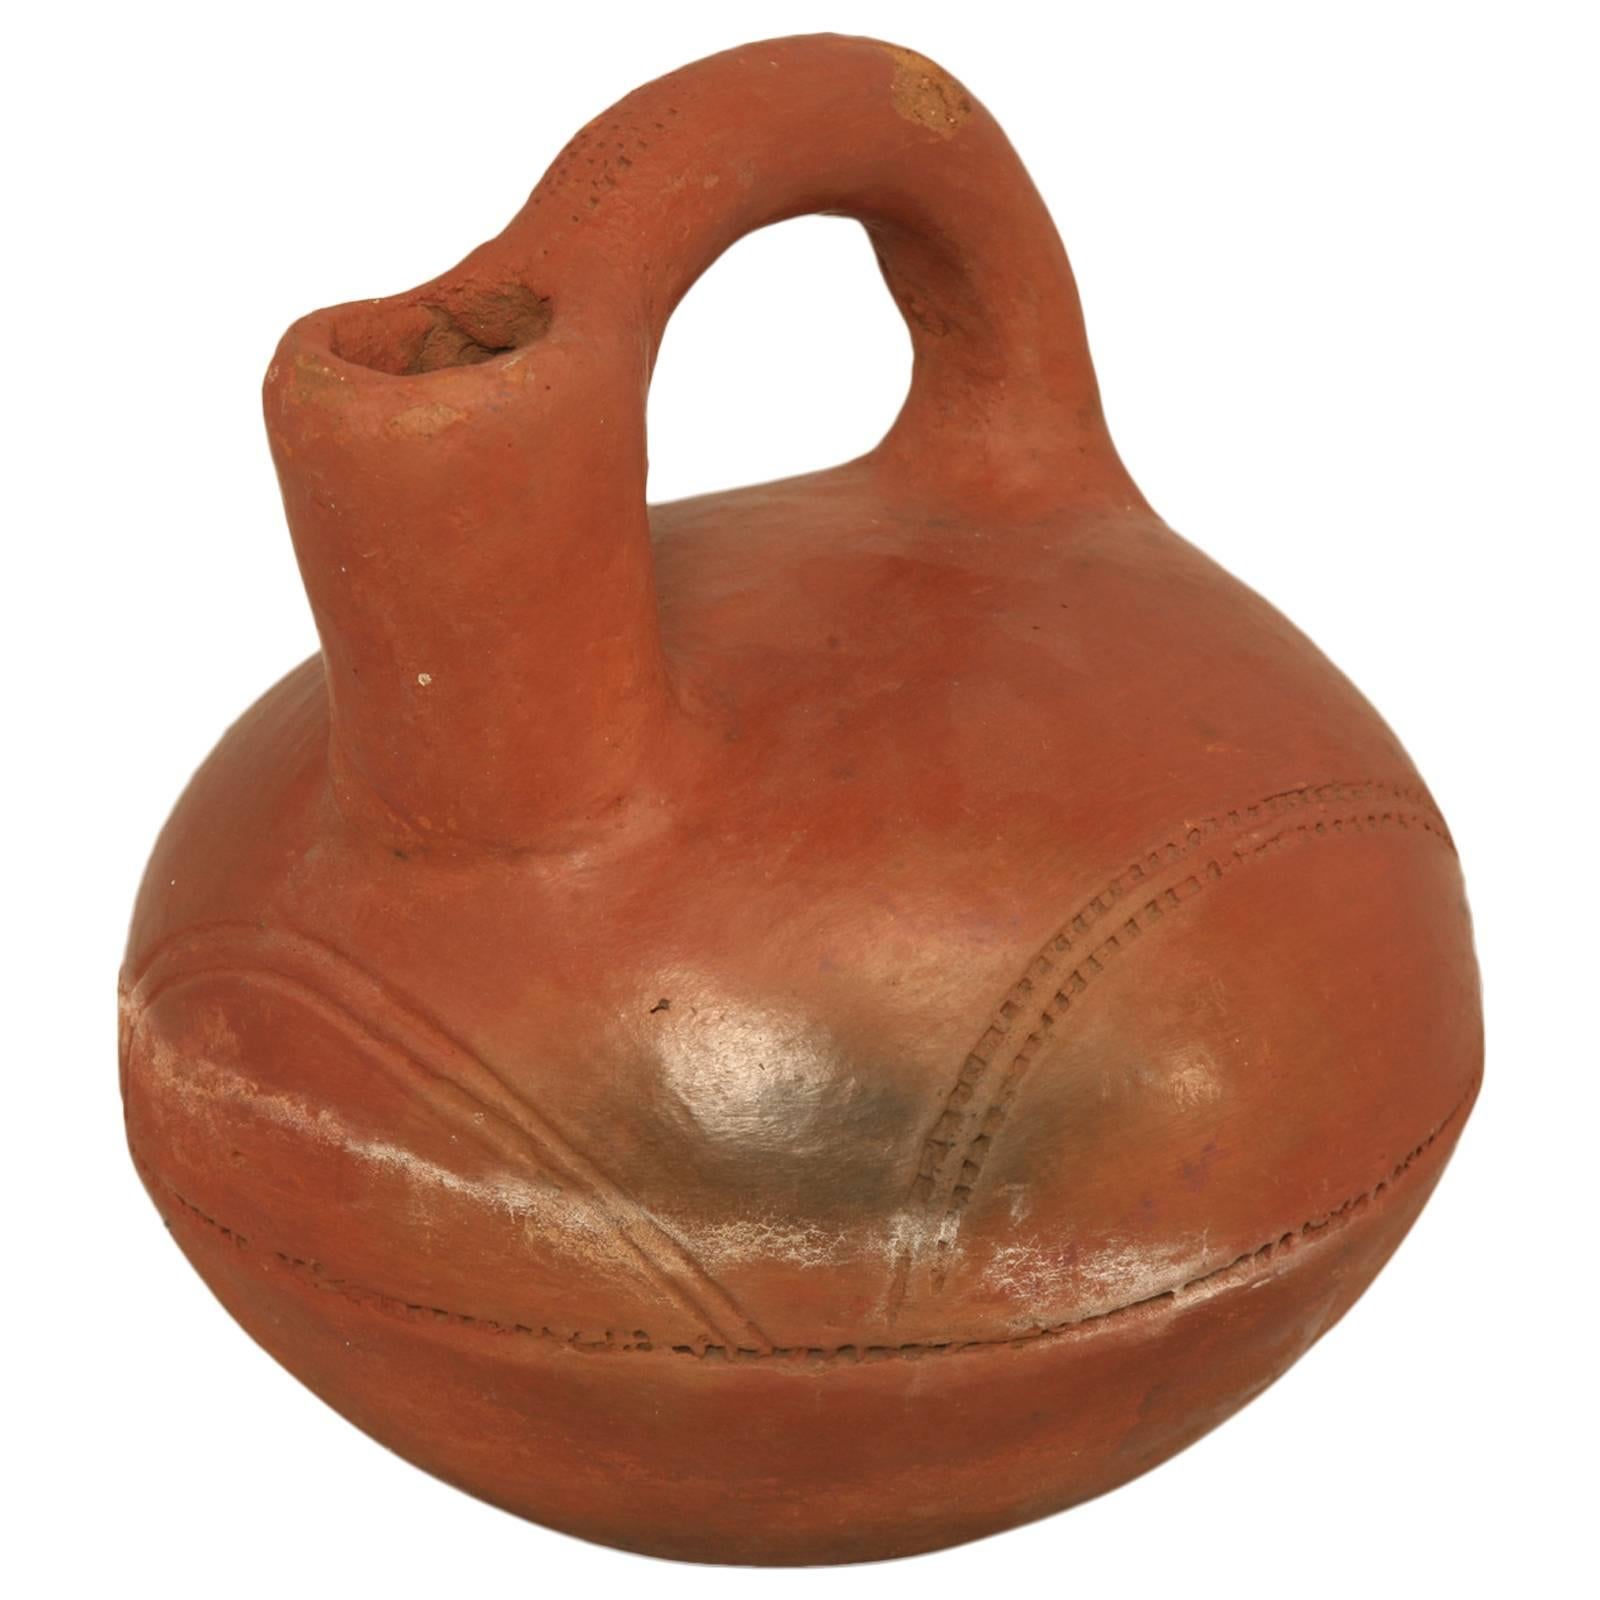 French Pottery Vessel or Jug